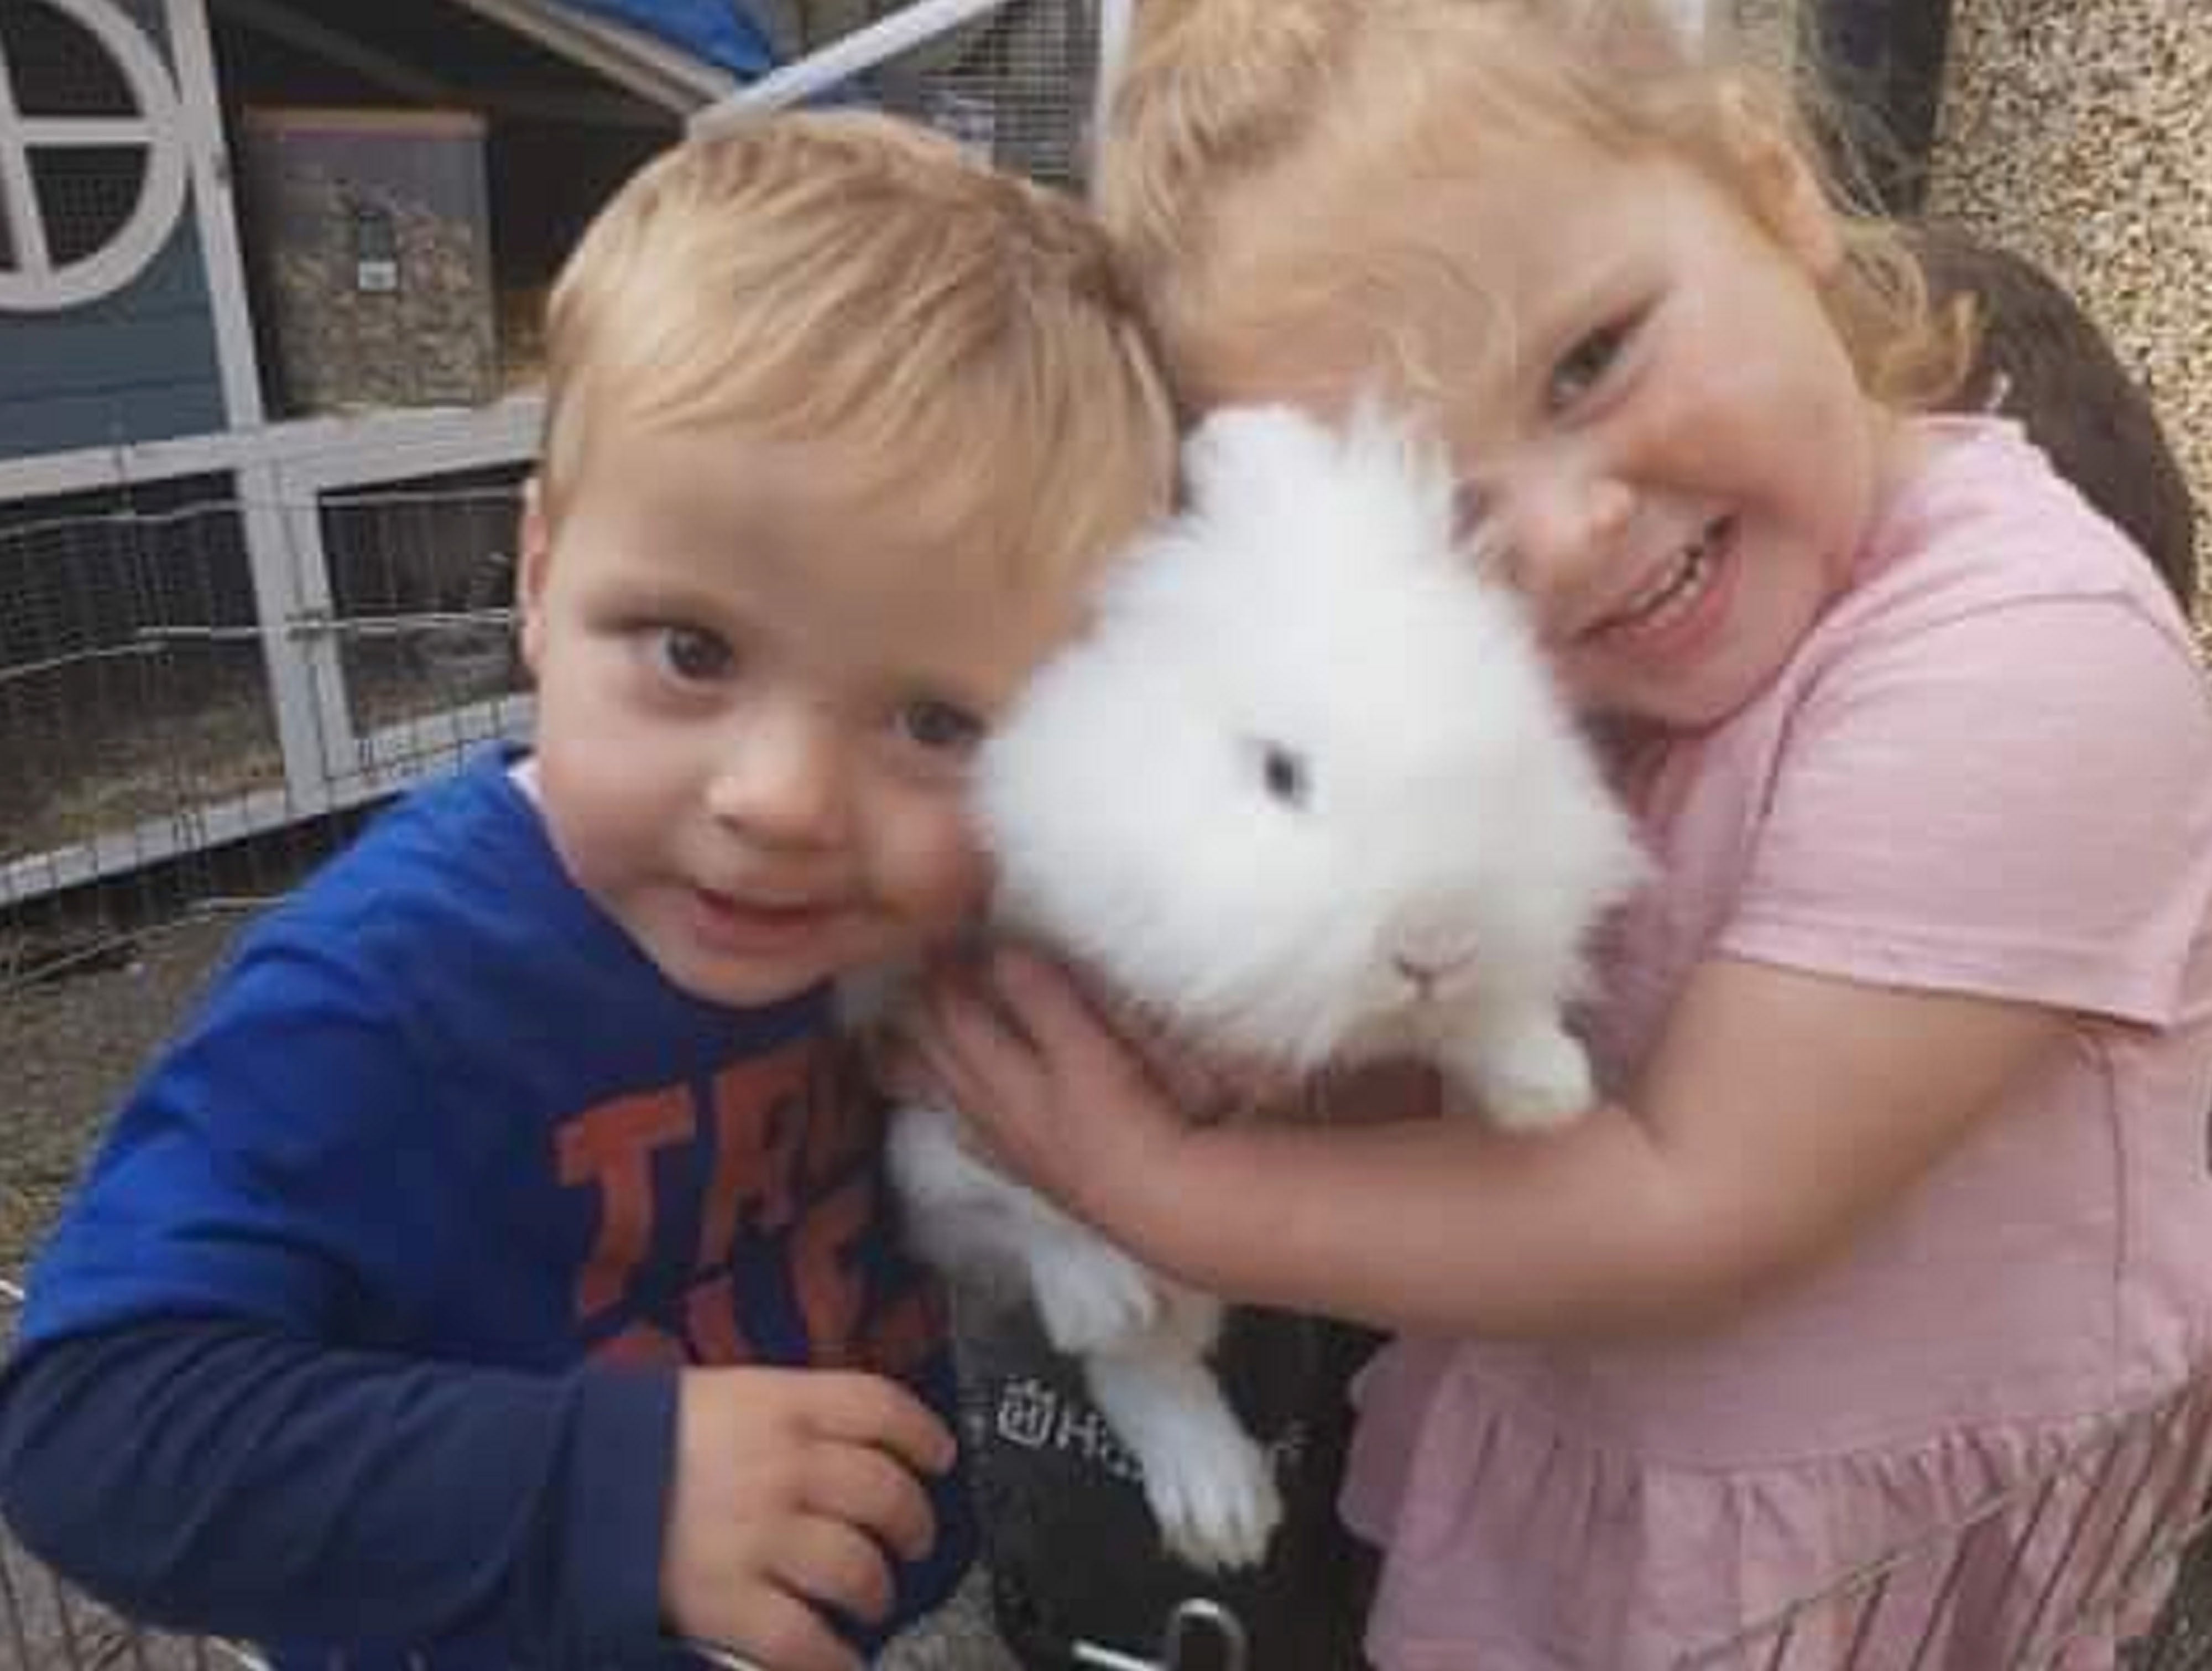 A photo of three-year-old Jayden-Lee Lucas and four-year-old Gracie-Ann Wheaton